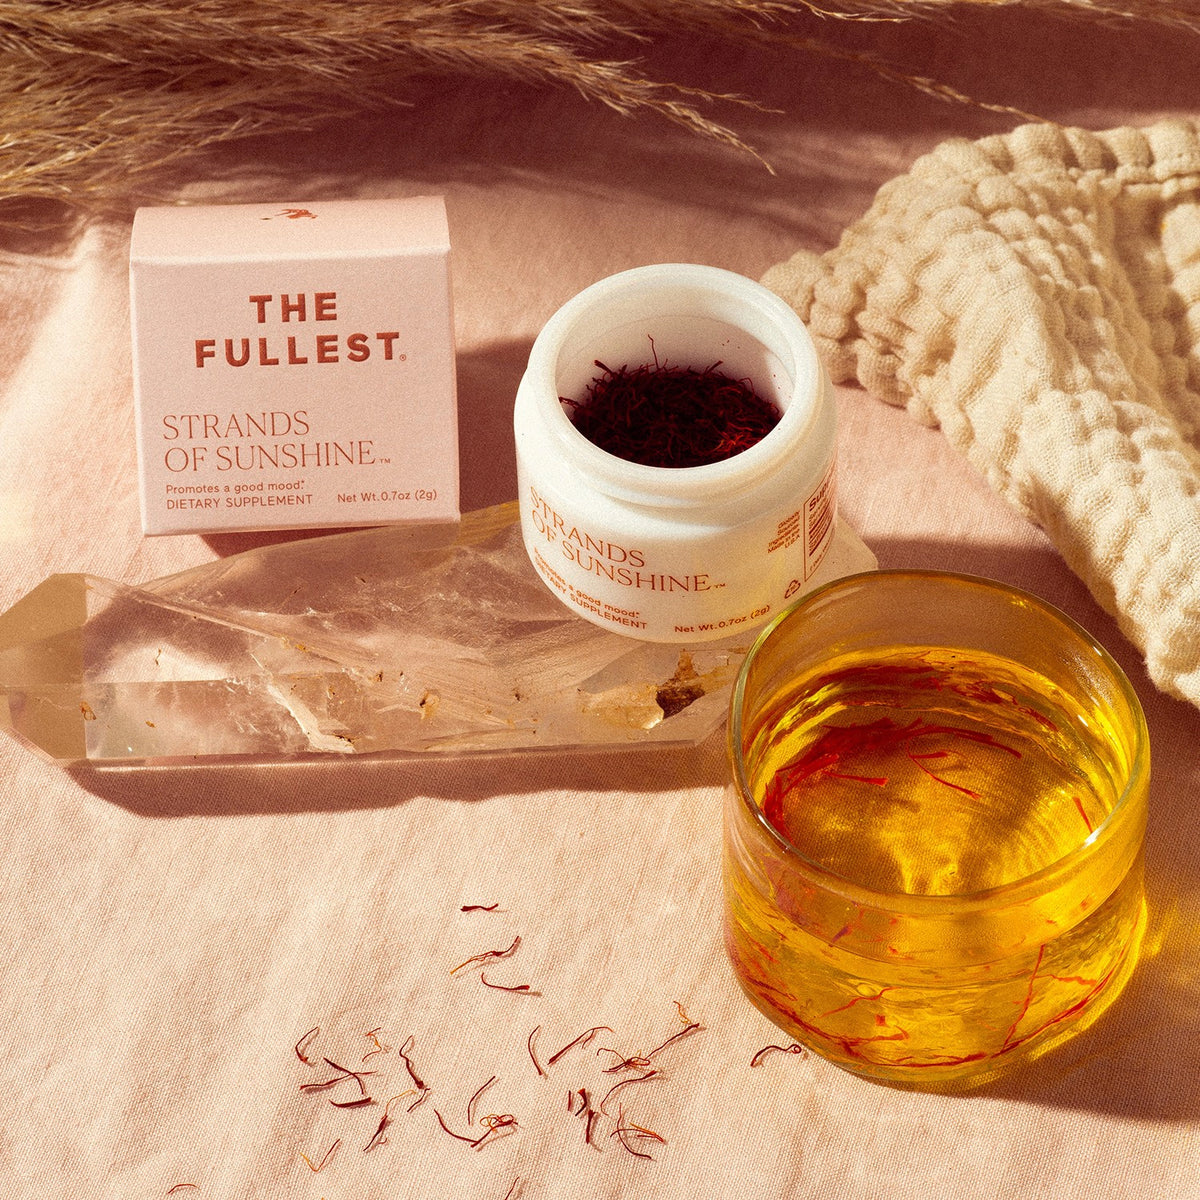 THE FULLEST &quot;Strands of Sunshine&quot;, made from pure saffron flower, is displayed with its packaging, alongside a clear cup of tea and scattered saffron threads on a textured surface.